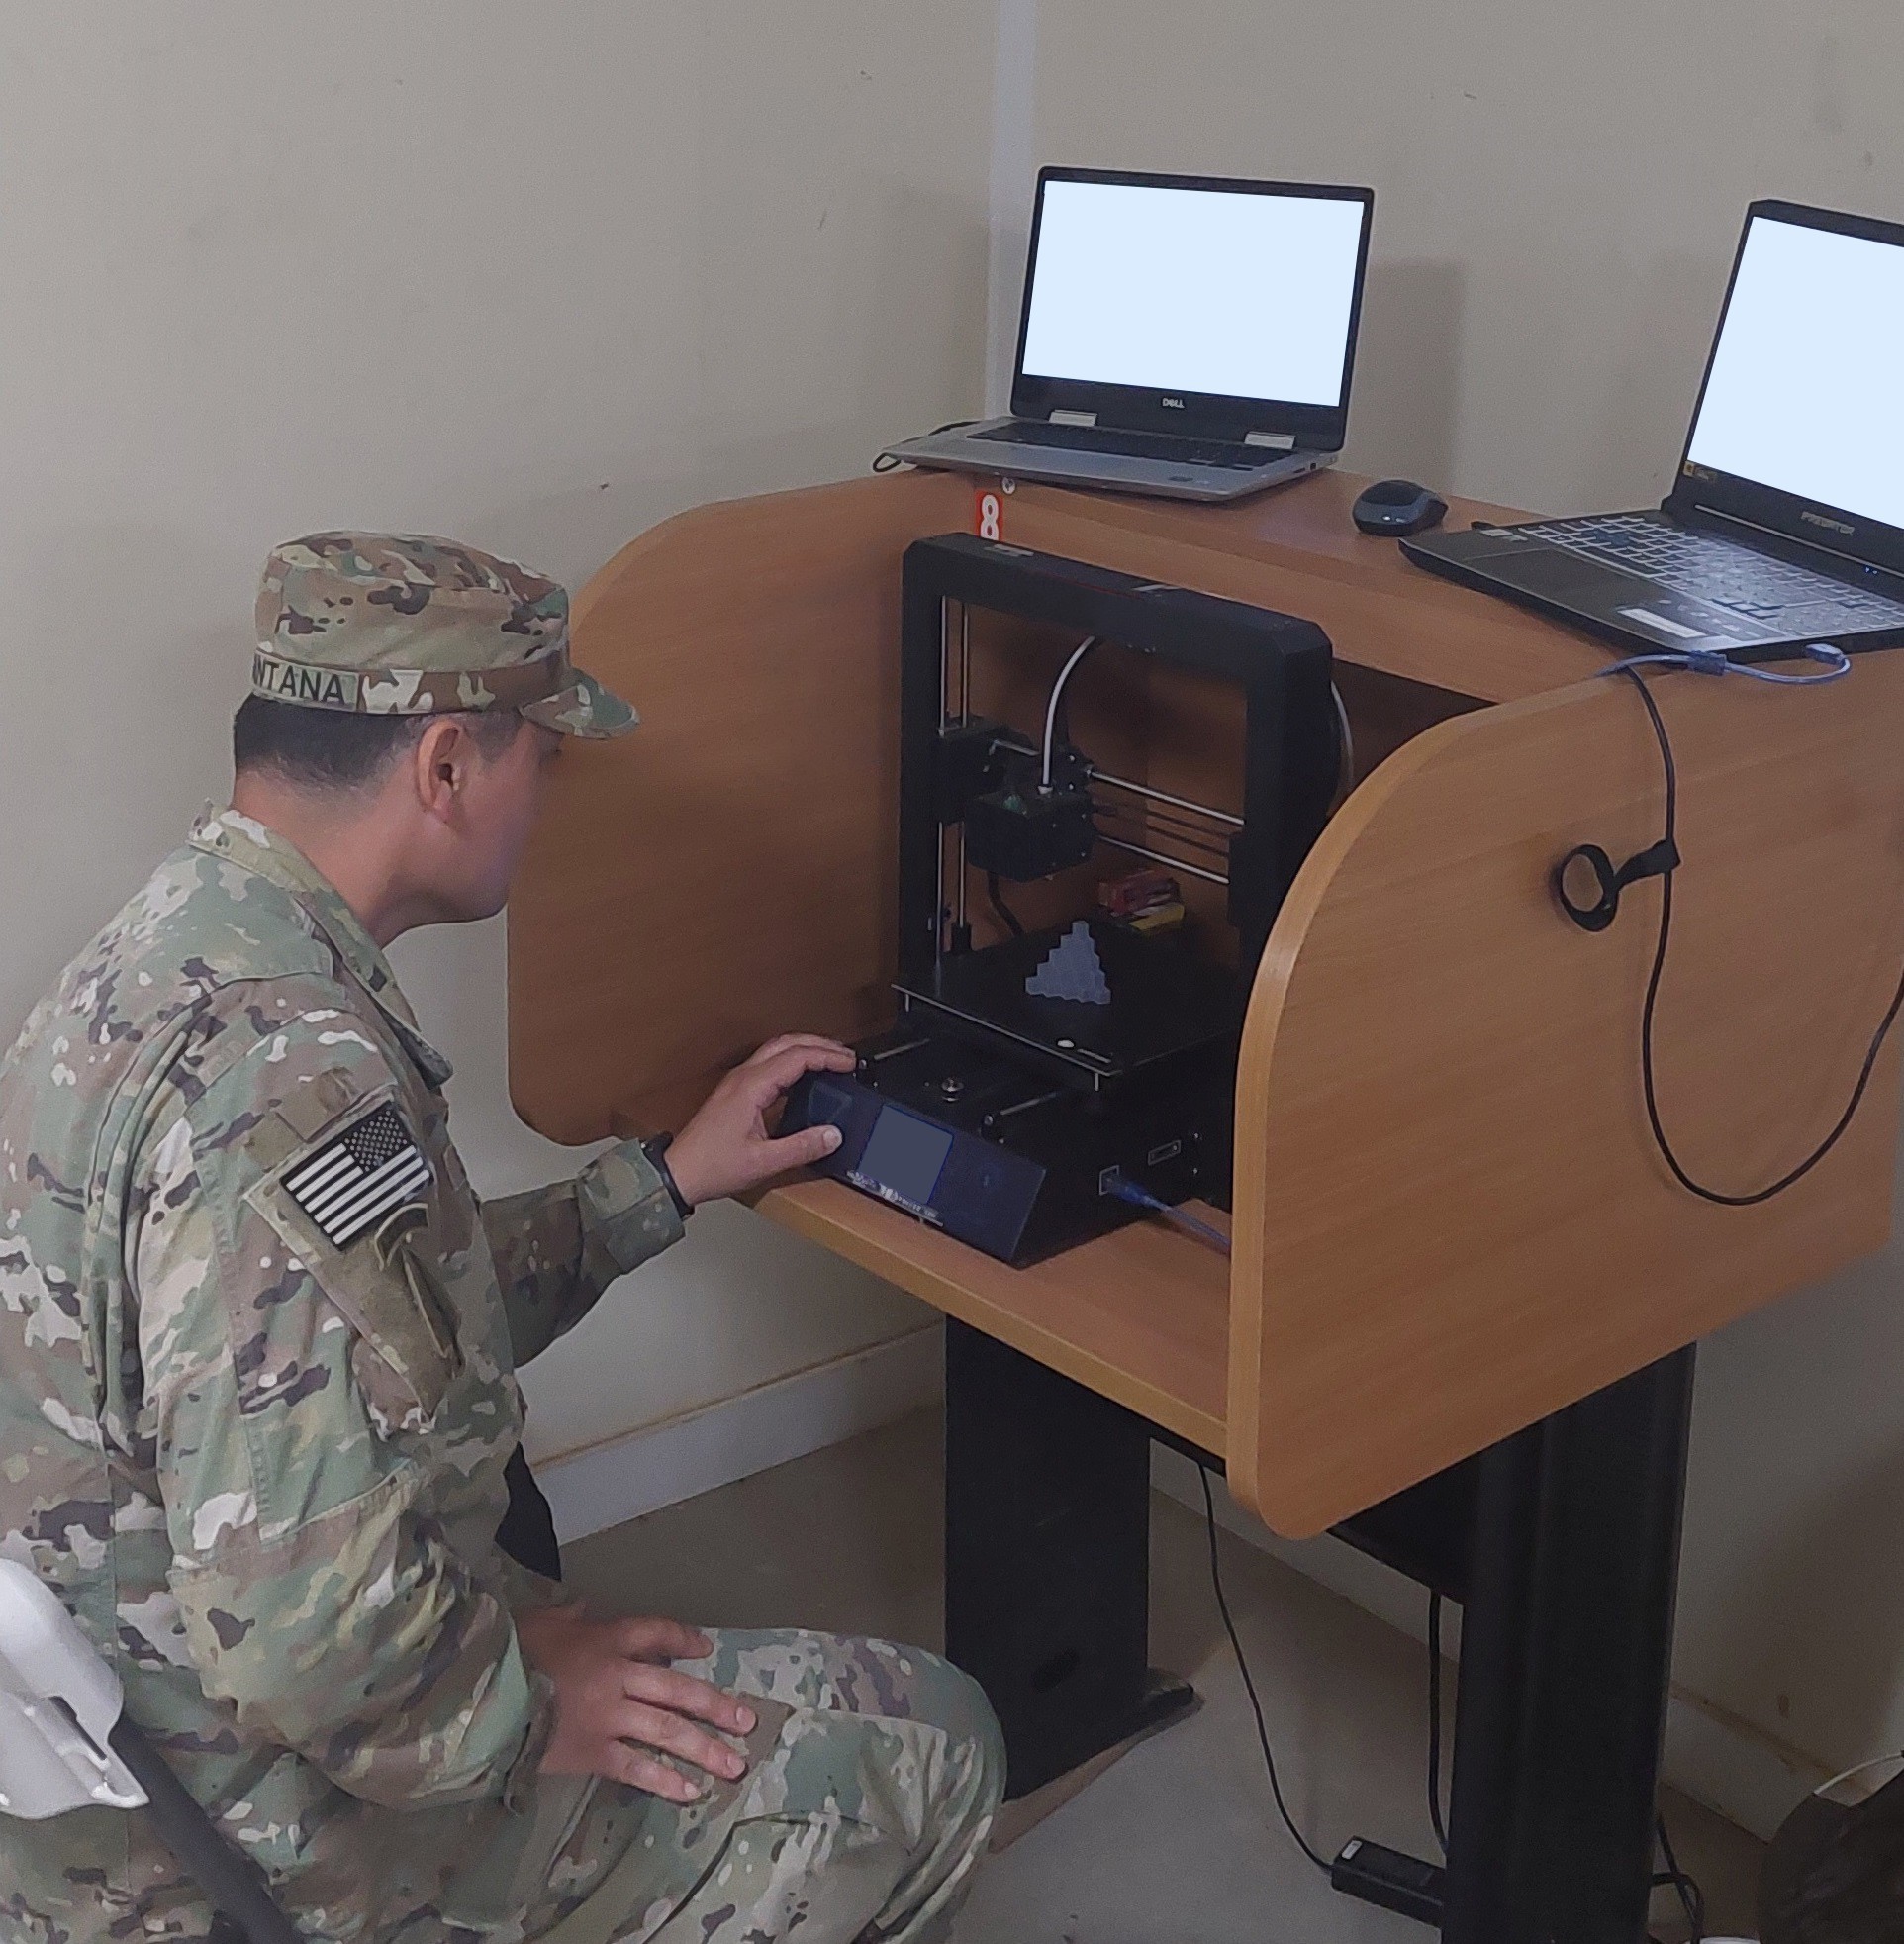 Soldiers from 7th SFG (A) tested the technology by repeatedly adding and printing additive manufacturing files using Defend3D’s VICI. Photo via US Army.